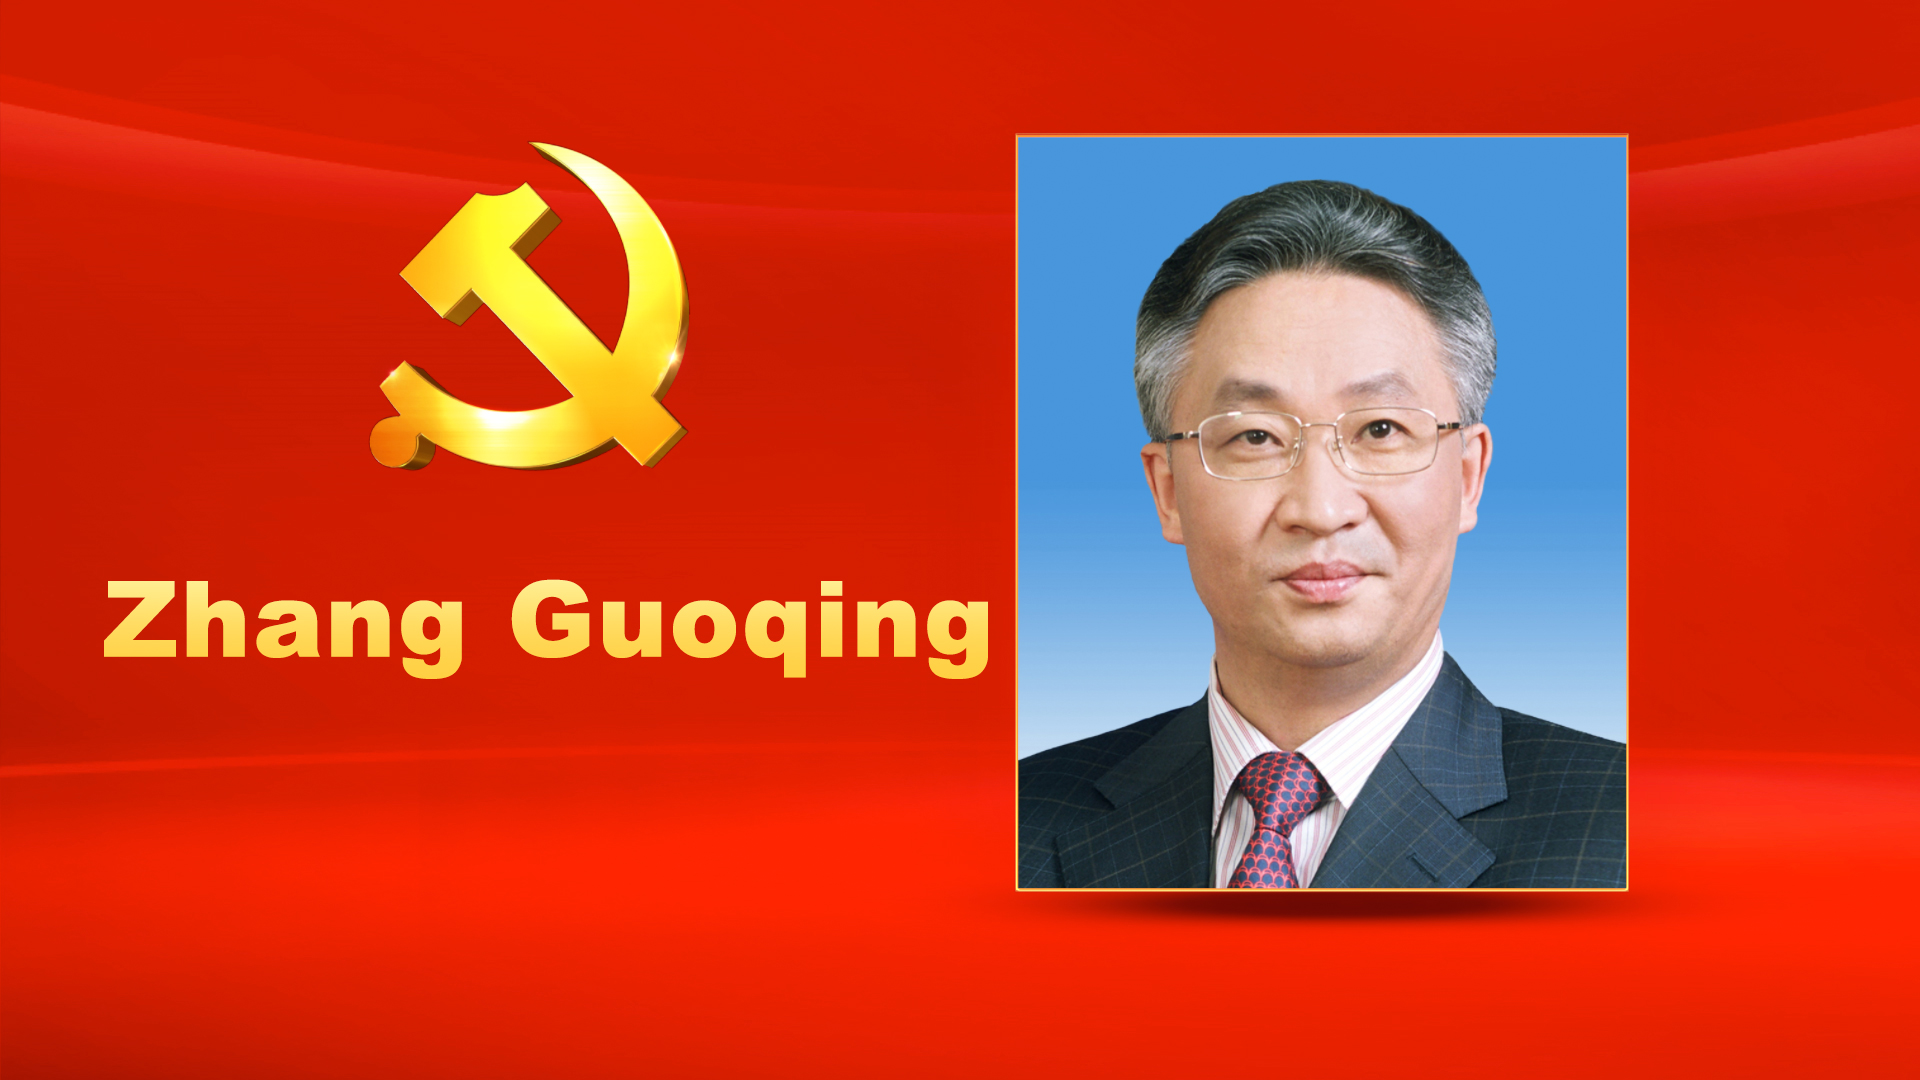 Zhang Guoqing, male, Han ethnicity, was born in August 1964 and is from Luoshan, Henan Province. He began his first job in September 1985 and joined the Communist Party of China (CPC) in July 1984. Zhang graduated from School of Economics and Management, Tsinghua University where he completed an in-service graduate program in quantitative economics. He holds a Doctor of Economics degree and a professional title of senior engineer at the research fellow level. Zhang is currently a member of the CPC Central Committee Political Bureau, Secretary of the CPC Liaoning Provincial Committee, and Chairman of the Standing Committee of the Liaoning Provincial People's Congress.